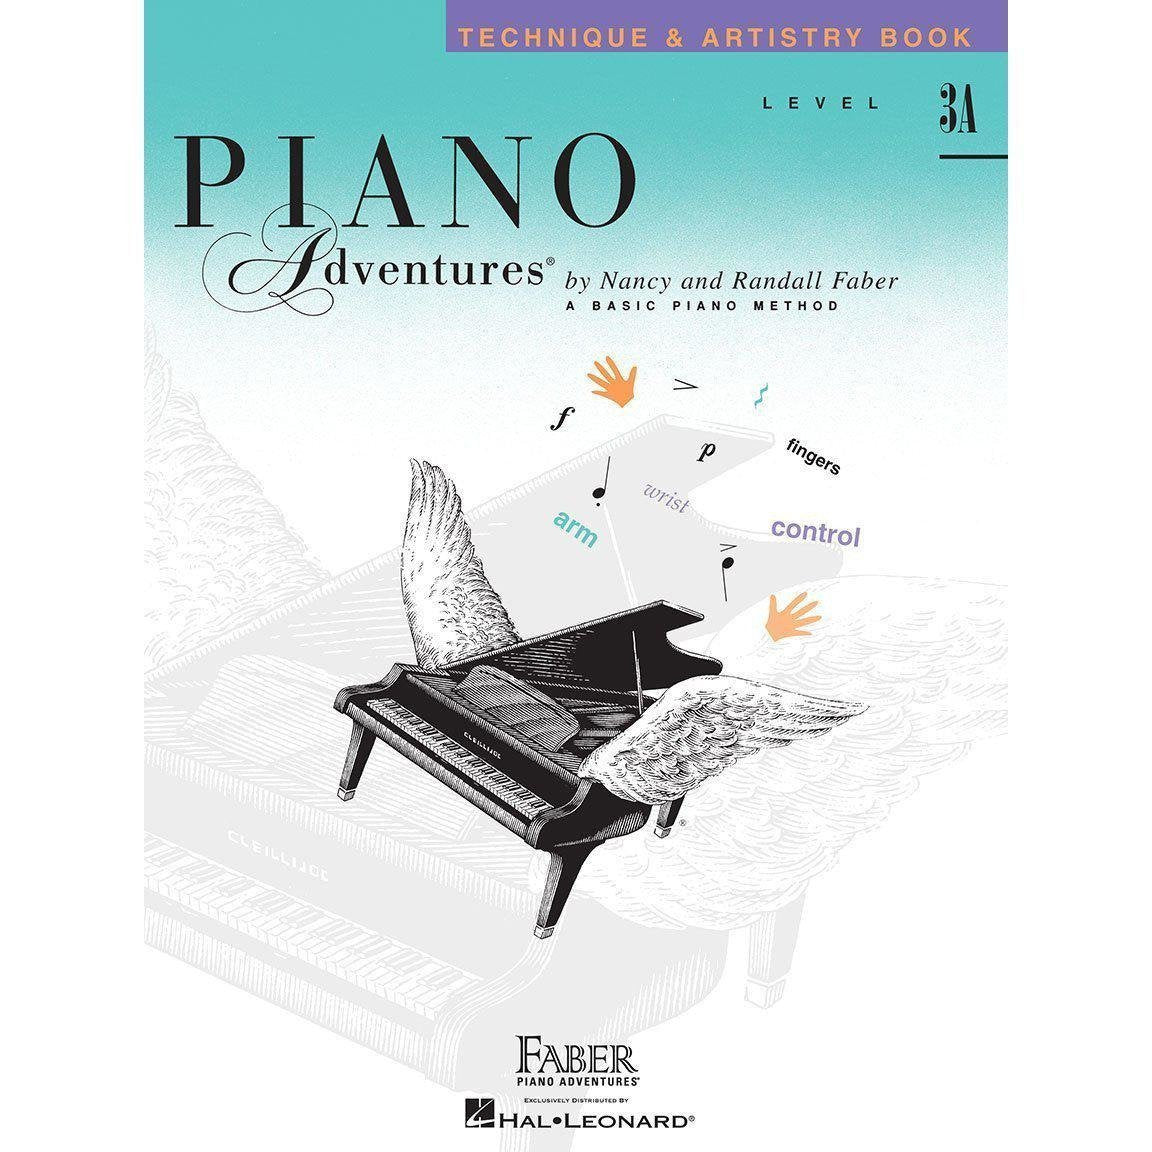 Faber Piano Adventures-3A-Tech & Artistry-Andy's Music